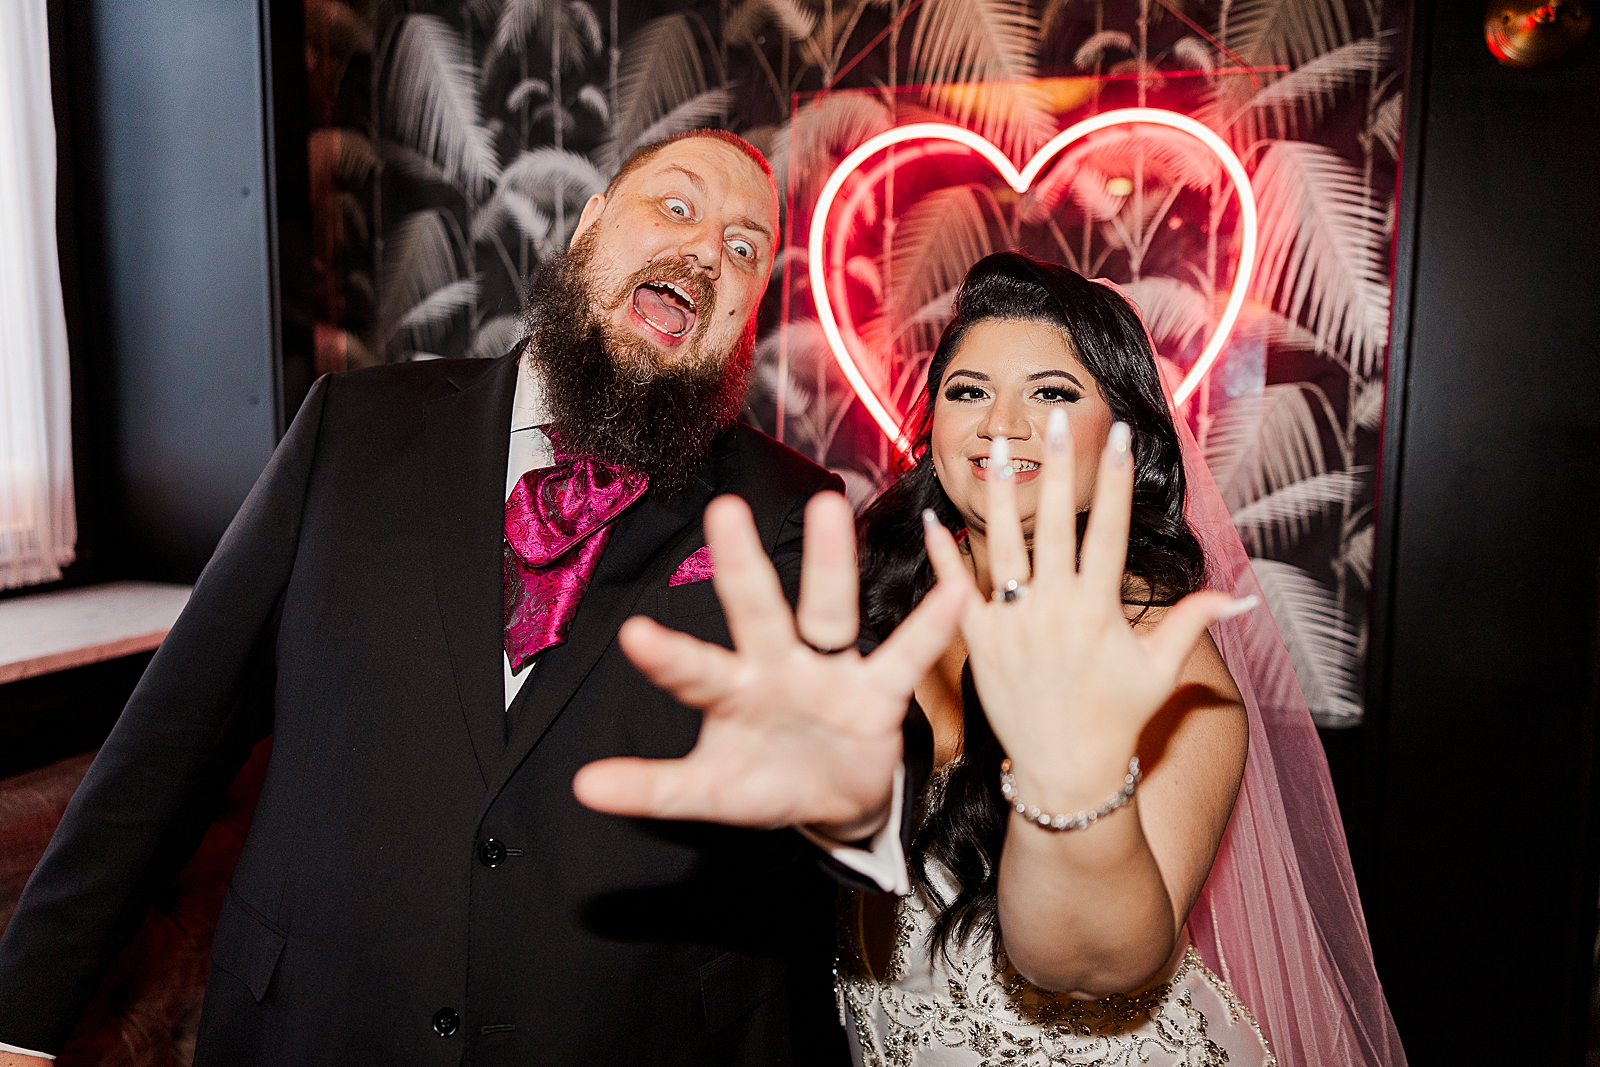 Upper body shot of the couple showing off their rings in front of a pink florescent light heart sign.